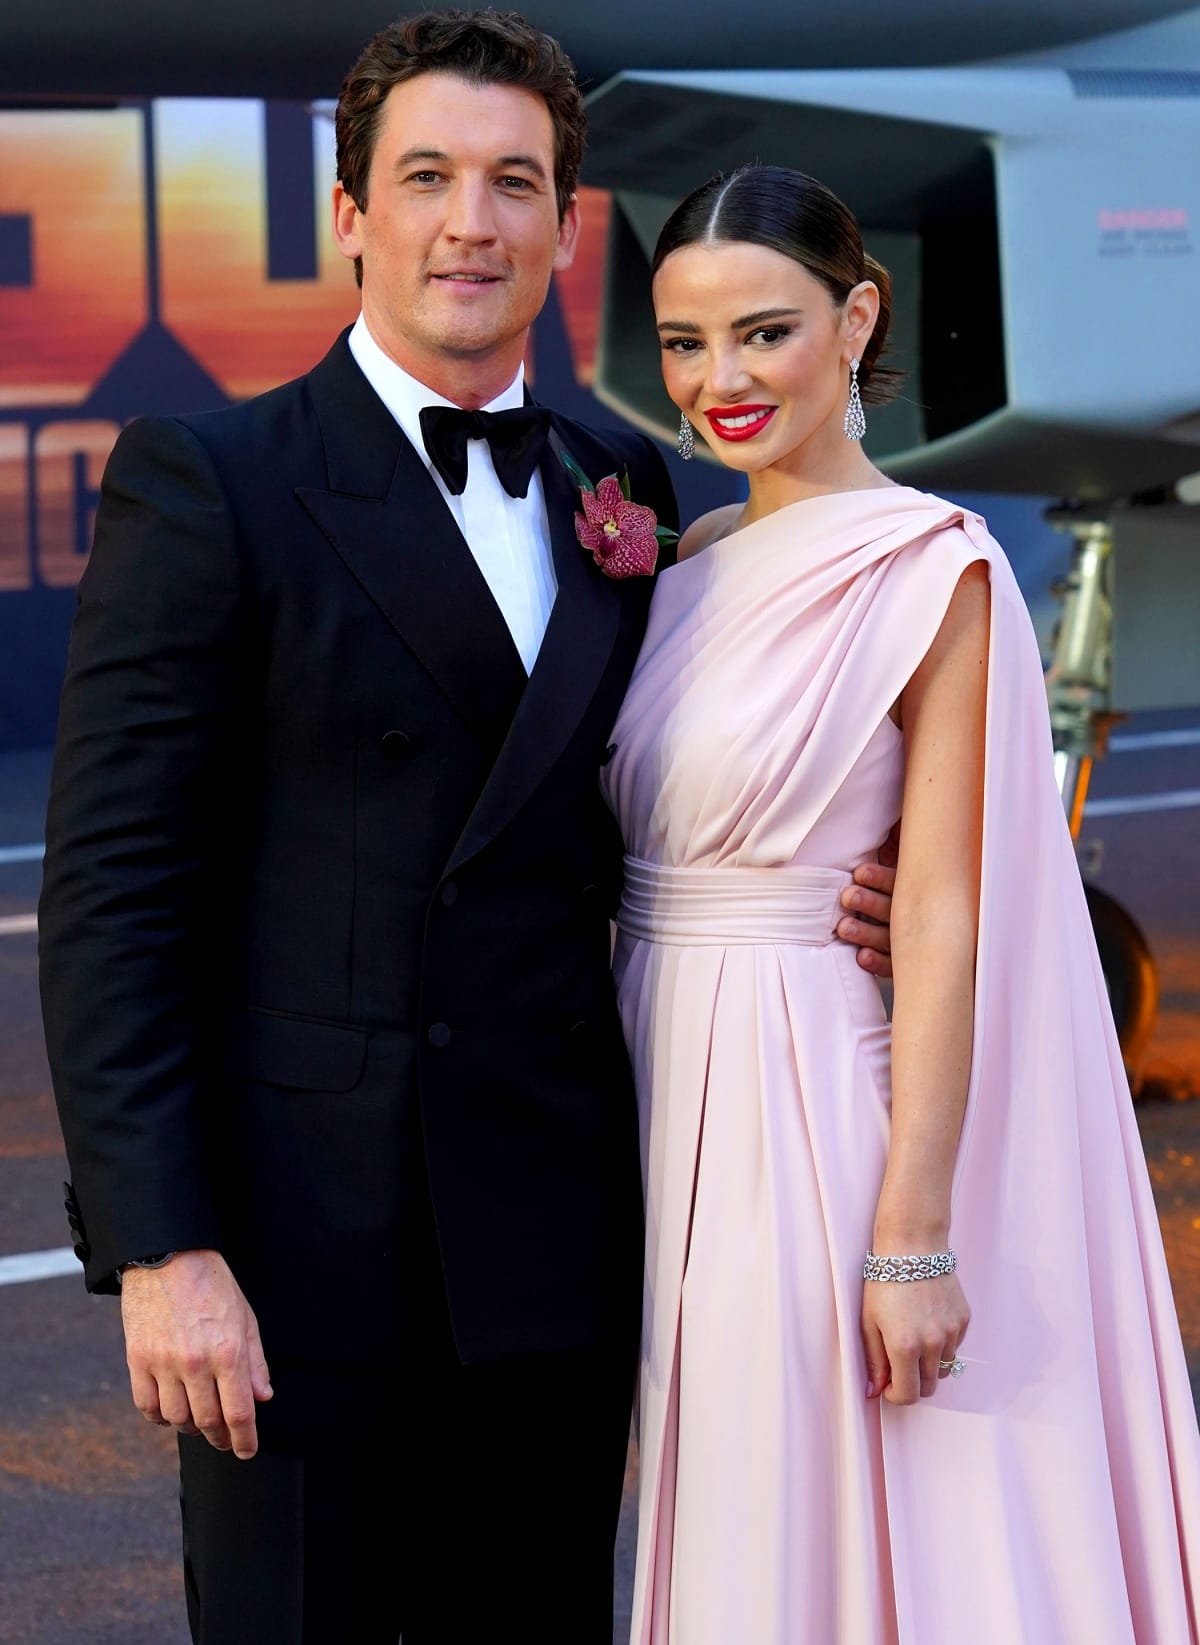 Miles Teller and Keleigh Sperry at the UK premiere of Top Gun: Maverick